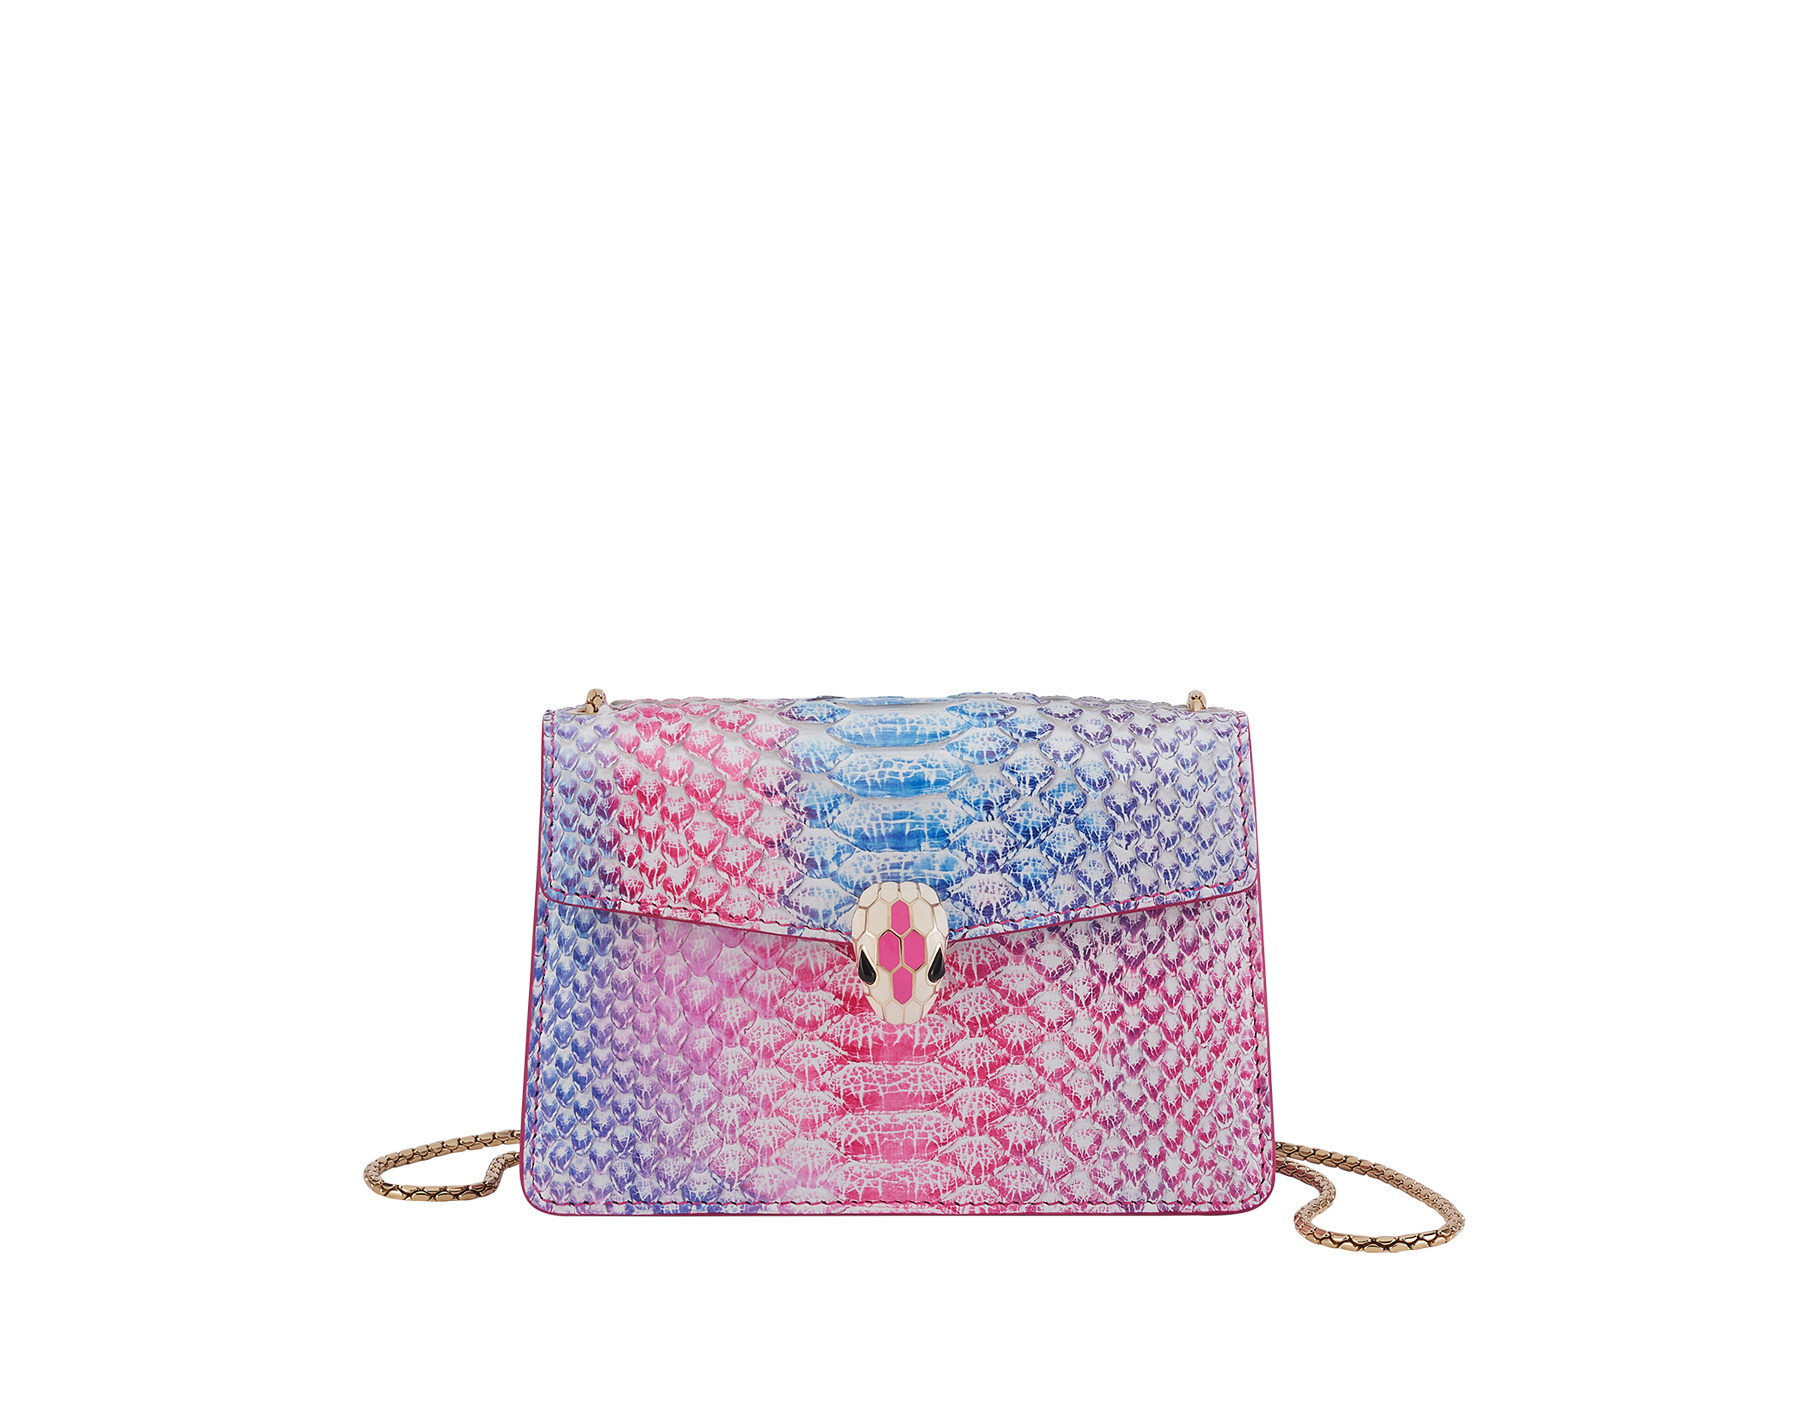 Serpenti Forever mini crossbody bag in multicolour Spring Shade python skin with azalea quartz pink nappa leather lining. Captivating magnetic snakehead closure in light gold-plated brass embellished with ivory opal and azalea quartz pink enamel scales and black onyx eyes. 292137 image 1